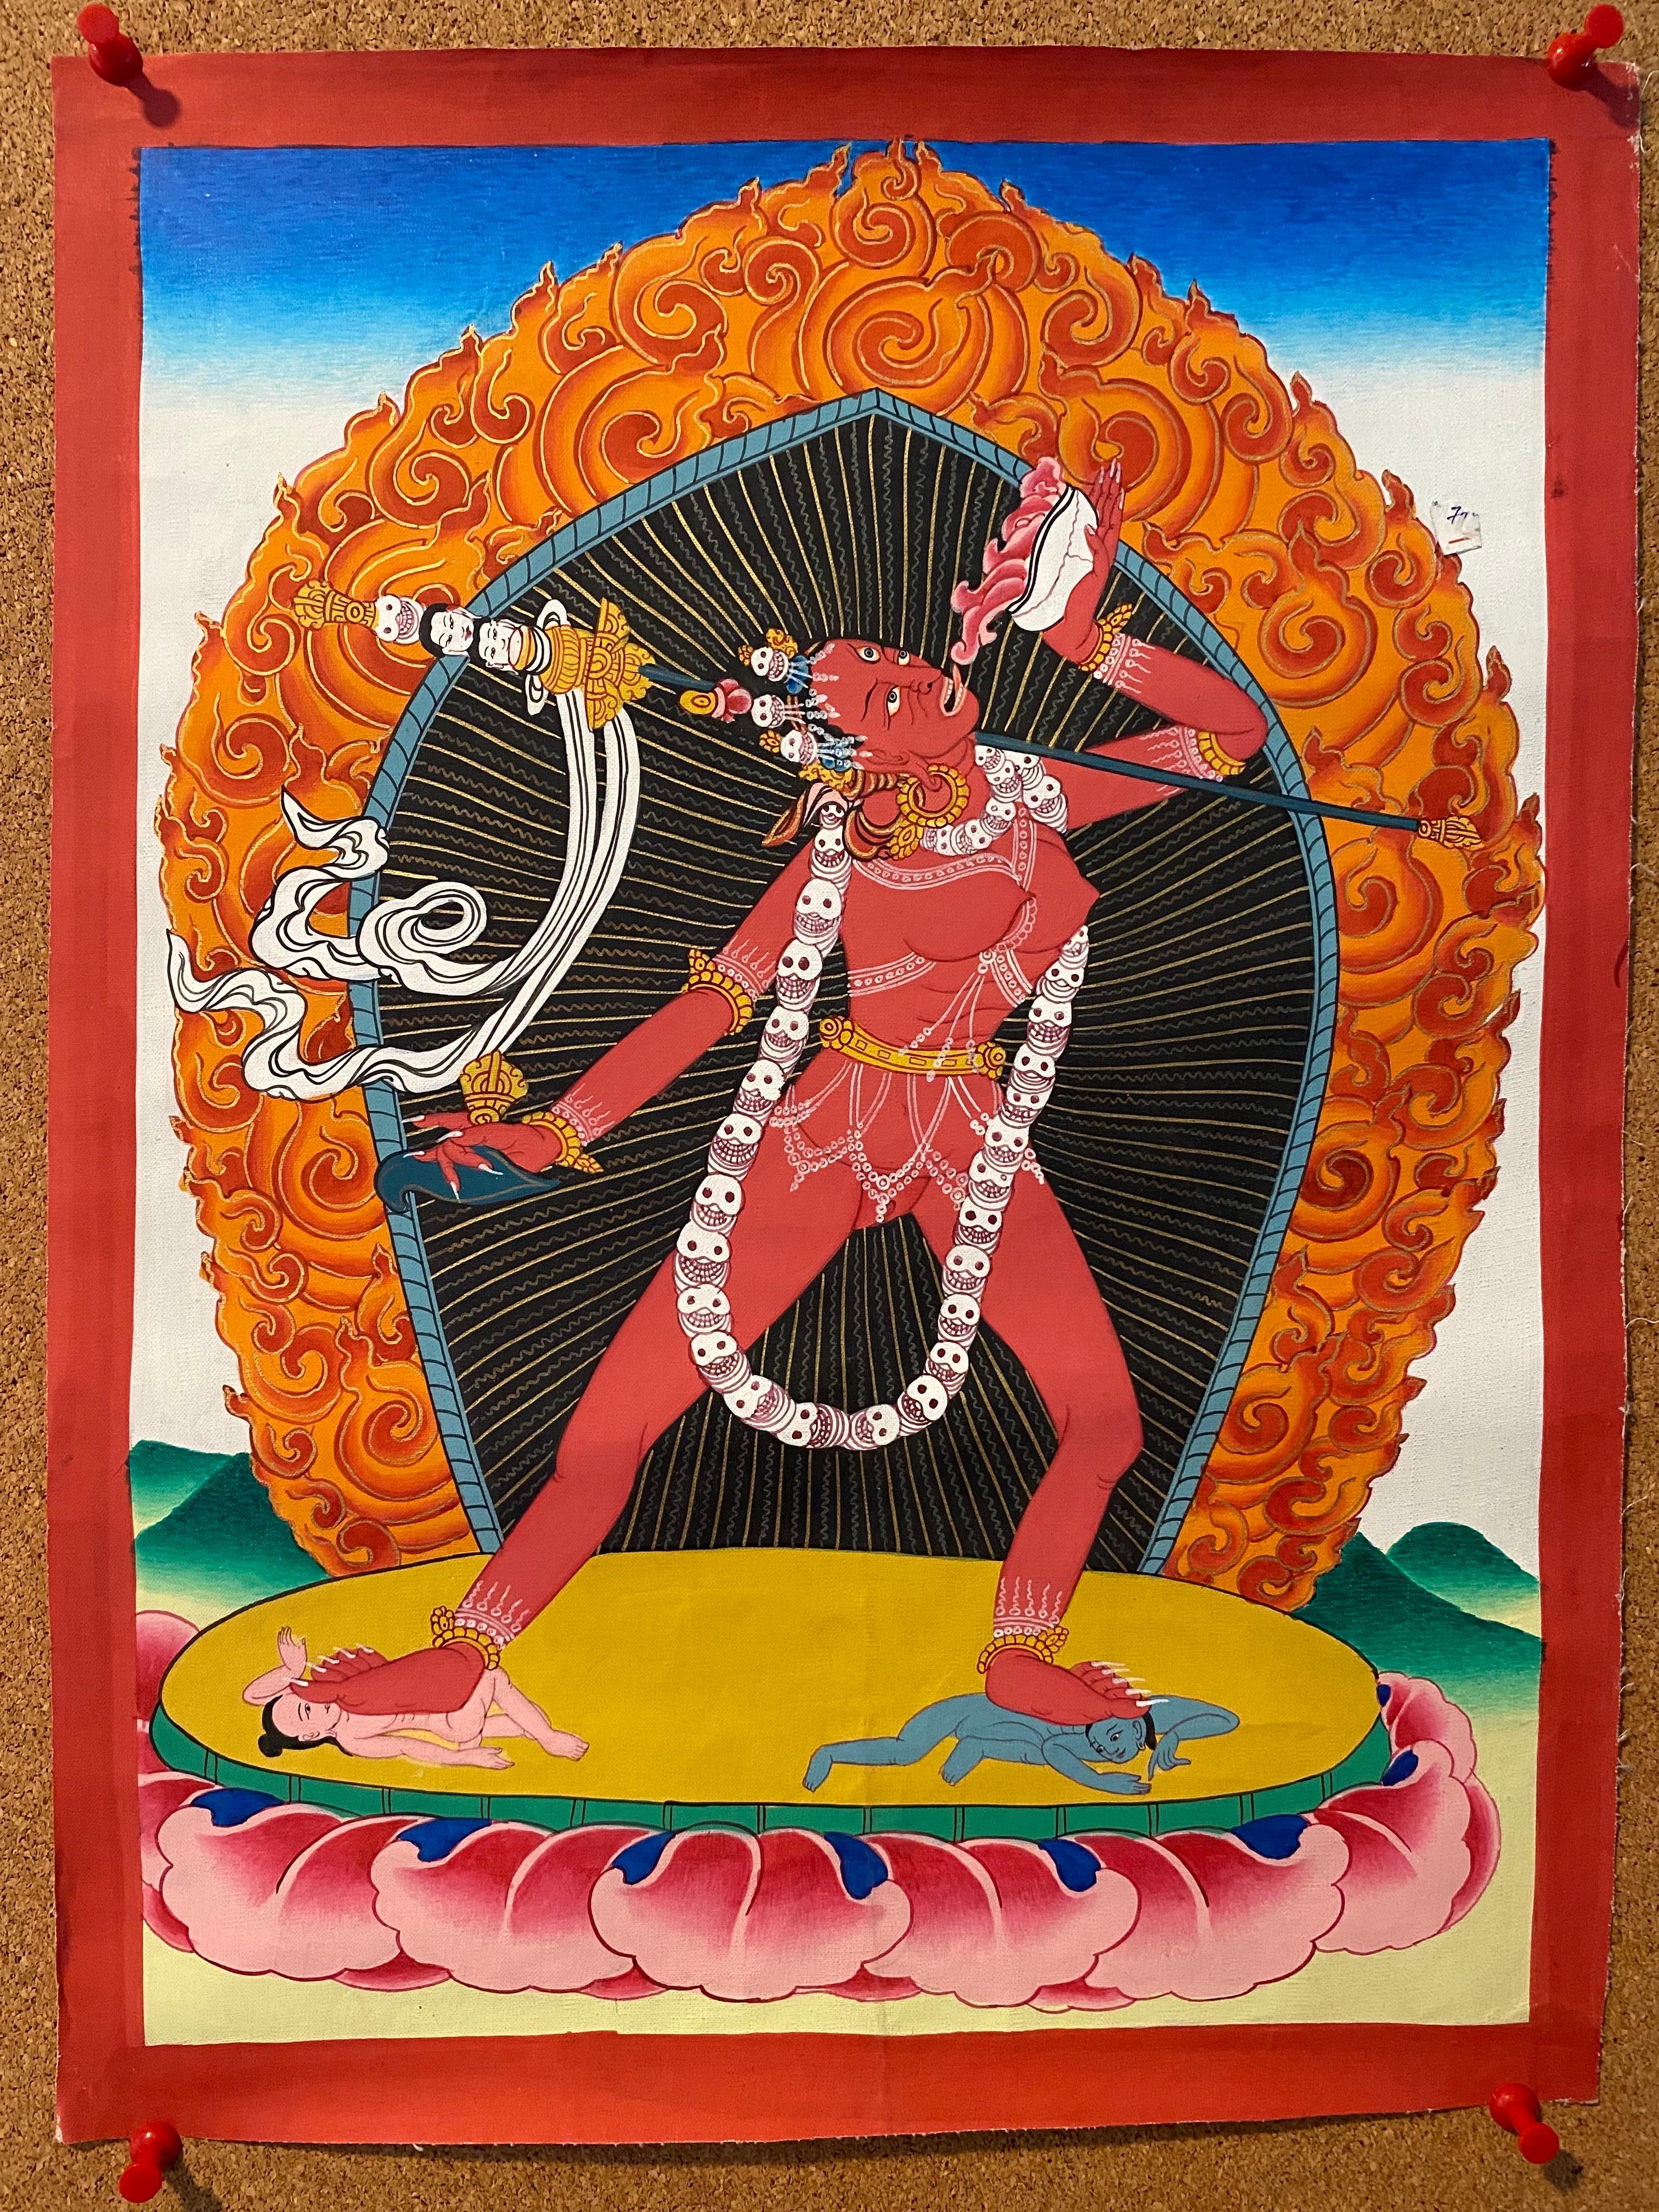 Thangka painting dates back to 7th century after Buddhism was spread in the Himalayan region (Nepal, Bhutan, Tibet and Northern India). In Eastern world Thangka is considered to be a part of Abhi-Dharma which means 